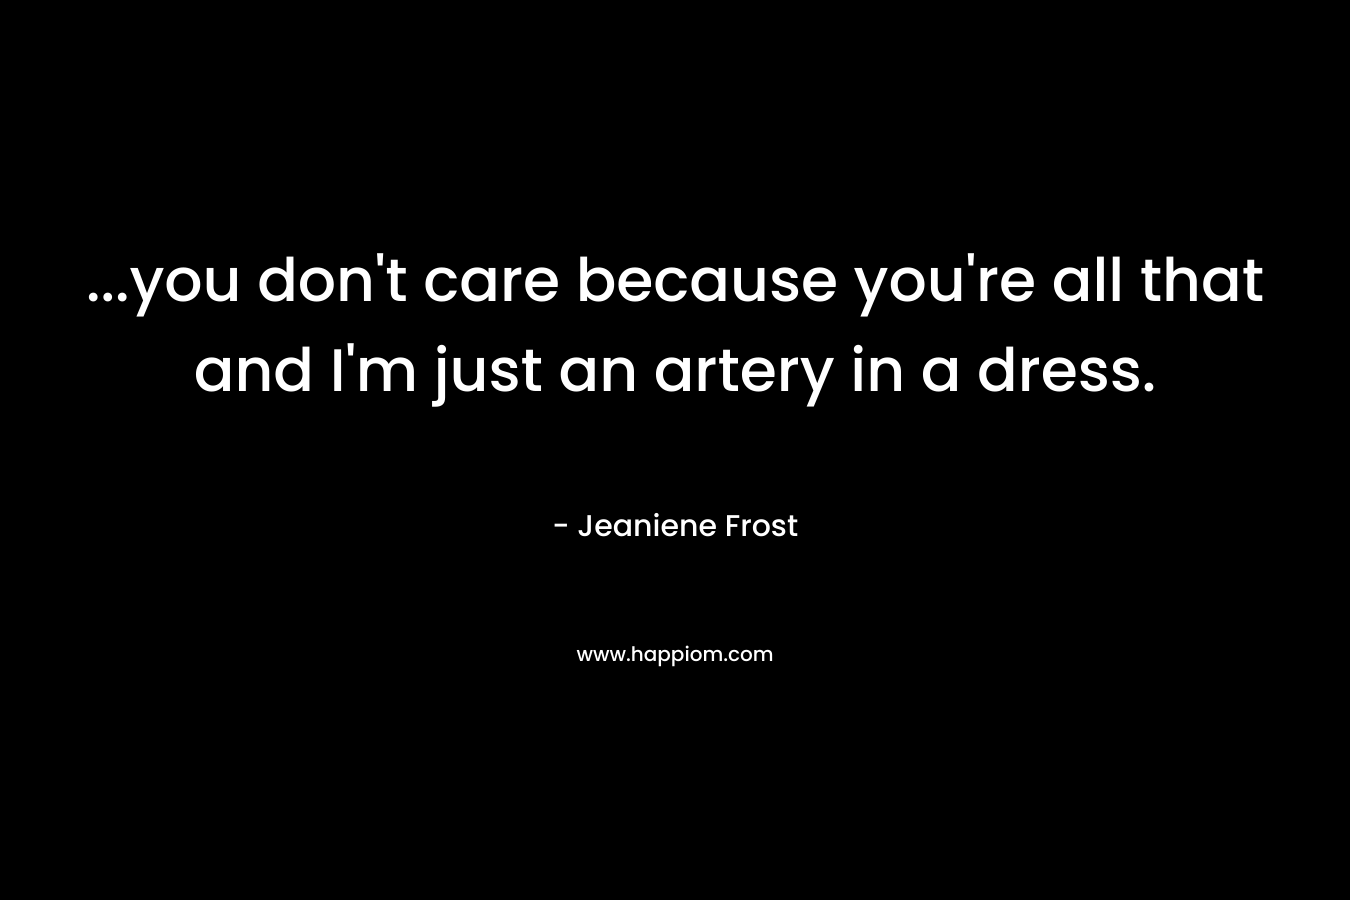 ...you don't care because you're all that and I'm just an artery in a dress. 